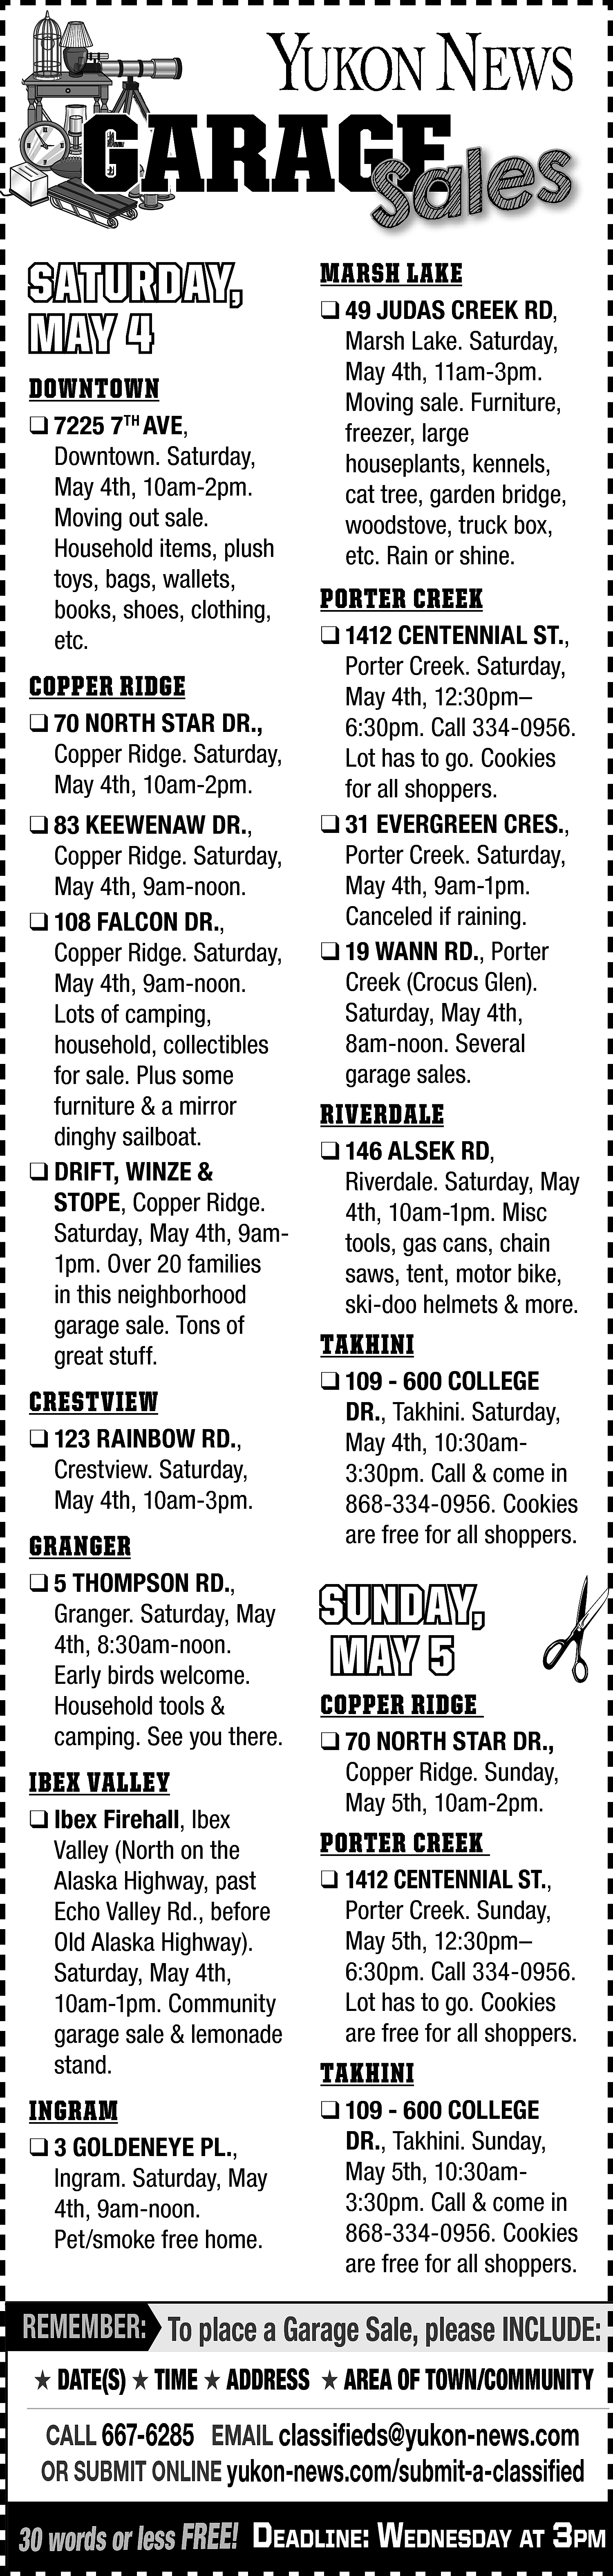 GARAGE <br>GE <br>Sales <br> <br>SATURDAY,  GARAGE  GE  Sales    SATURDAY,  MAY 4  DOWNTOWN    ❑ 7225 7TH AVE,  Downtown. Saturday,  May 4th, 10am-2pm.  Moving out sale.  Household items, plush  toys, bags, wallets,  books, shoes, clothing,  etc.    COPPER RIDGE  ❑ 70 NORTH STAR DR.,  Copper Ridge. Saturday,  May 4th, 10am-2pm.  ❑ 83 KEEWENAW DR.,  Copper Ridge. Saturday,  May 4th, 9am-noon.  ❑ 108 FALCON DR.,  Copper Ridge. Saturday,  May 4th, 9am-noon.  Lots of camping,  household, collectibles  for sale. Plus some  furniture & a mirror  dinghy sailboat.  ❑ DRIFT, WINZE &  STOPE, Copper Ridge.  Saturday, May 4th, 9am1pm. Over 20 families  in this neighborhood  garage sale. Tons of  great stuff.    CRESTVIEW  ❑ 123 RAINBOW RD.,  Crestview. Saturday,  May 4th, 10am-3pm.    GRANGER  ❑ 5 THOMPSON RD.,  Granger. Saturday, May  4th, 8:30am-noon.  Early birds welcome.  Household tools &  camping. See you there.    IBEX VALLEY  ❑ Ibex Firehall, Ibex  Valley (North on the  Alaska Highway, past  Echo Valley Rd., before  Old Alaska Highway).  Saturday, May 4th,  10am-1pm. Community  garage sale & lemonade  stand.    INGRAM  ❑ 3 GOLDENEYE PL.,  Ingram. Saturday, May  4th, 9am-noon.  Pet/smoke free home.    MARSH LAKE    ❑ 49 JUDAS CREEK RD,  Marsh Lake. Saturday,  May 4th, 11am-3pm.  Moving sale. Furniture,  freezer, large  houseplants, kennels,  cat tree, garden bridge,  woodstove, truck box,  etc. Rain or shine.    PORTER CREEK  ❑ 1412 CENTENNIAL ST.,  Porter Creek. Saturday,  May 4th, 12:30pm–  6:30pm. Call 334-0956.  Lot has to go. Cookies  for all shoppers.  ❑ 31 EVERGREEN CRES.,  Porter Creek. Saturday,  May 4th, 9am-1pm.  Canceled if raining.  ❑ 19 WANN RD., Porter  Creek (Crocus Glen).  Saturday, May 4th,  8am-noon. Several  garage sales.    RIVERDALE  ❑ 146 ALSEK RD,  Riverdale. Saturday, May  4th, 10am-1pm. Misc  tools, gas cans, chain  saws, tent, motor bike,  ski-doo helmets & more.    TAKHINI  ❑ 109 - 600 COLLEGE  DR., Takhini. Saturday,  May 4th, 10:30am3:30pm. Call & come in  868-334-0956. Cookies  are free for all shoppers.    SUNDAY,  MAY 5  COPPER RIDGE    ❑ 70 NORTH STAR DR.,  Copper Ridge. Sunday,  May 5th, 10am-2pm.    PORTER CREEK  ❑ 1412 CENTENNIAL ST.,  Porter Creek. Sunday,  May 5th, 12:30pm–  6:30pm. Call 334-0956.  Lot has to go. Cookies  are free for all shoppers.    TAKHINI  ❑ 109 - 600 COLLEGE  DR., Takhini. Sunday,  May 5th, 10:30am3:30pm. Call & come in  868-334-0956. Cookies  are free for all shoppers.    REMEMBER: To place a Garage Sale, please INCLUDE:  ★ DATE(S) ★ TIME ★ ADDRESS ★ AREA OF TOWN/COMMUNITY    CALL 667-6285 EMAIL classifieds@yukon-news.com  OR SUBMIT ONLINE yukon-news.com/submit-a-classified    30 words or less FREE! DeaDline: WeDnesDay at 3pm    